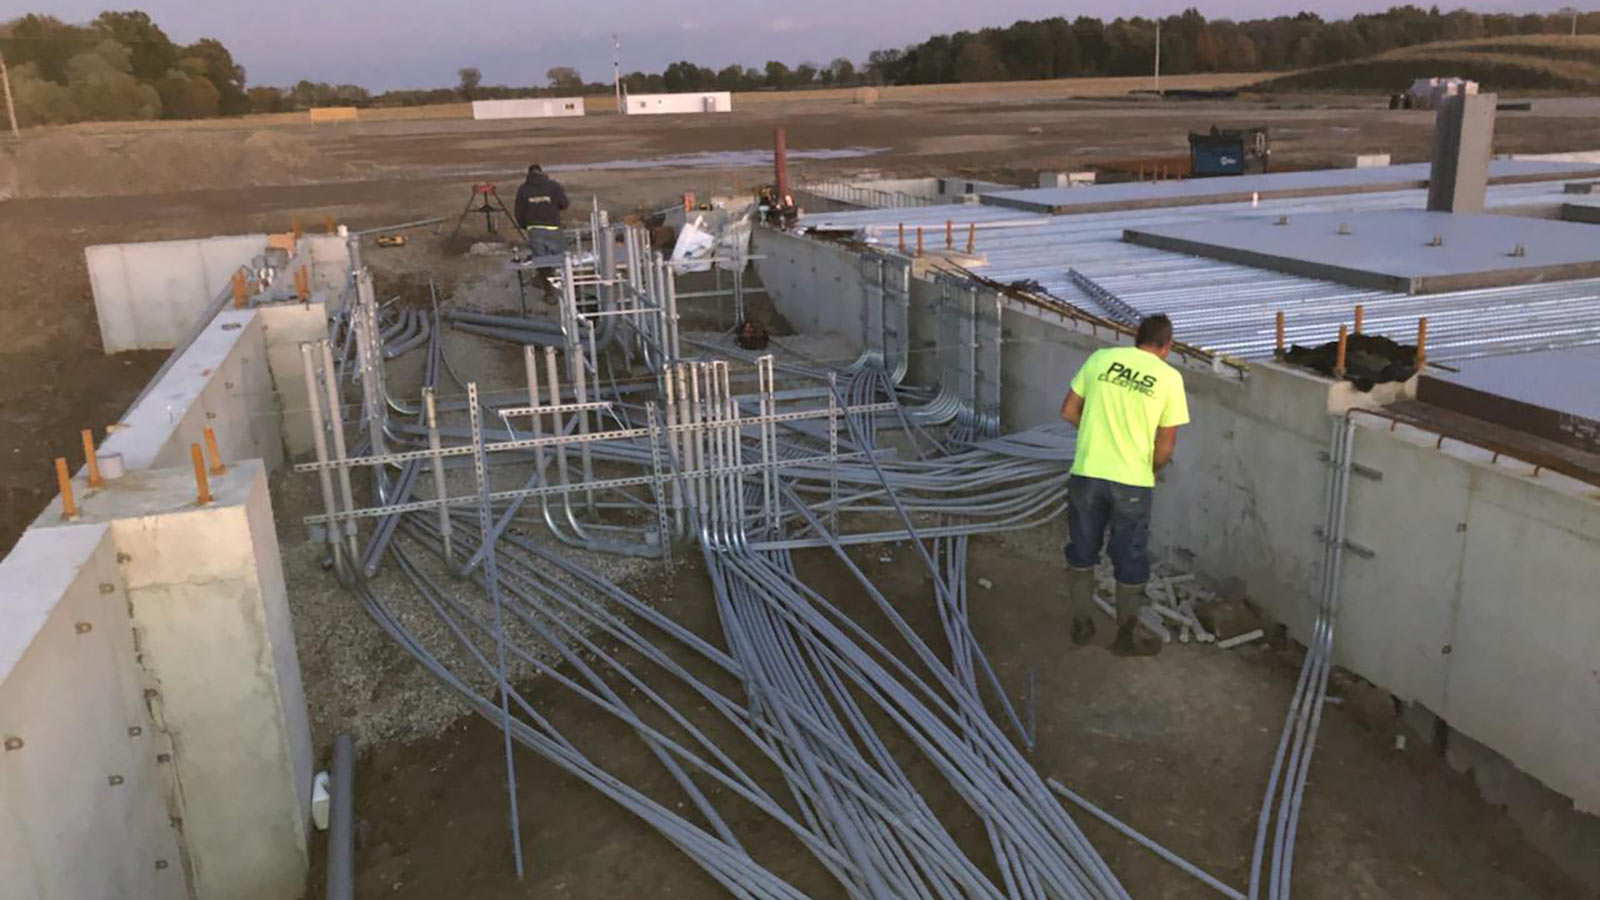 Pal's Electricians working along the foundation of the Indiana Feed Mill